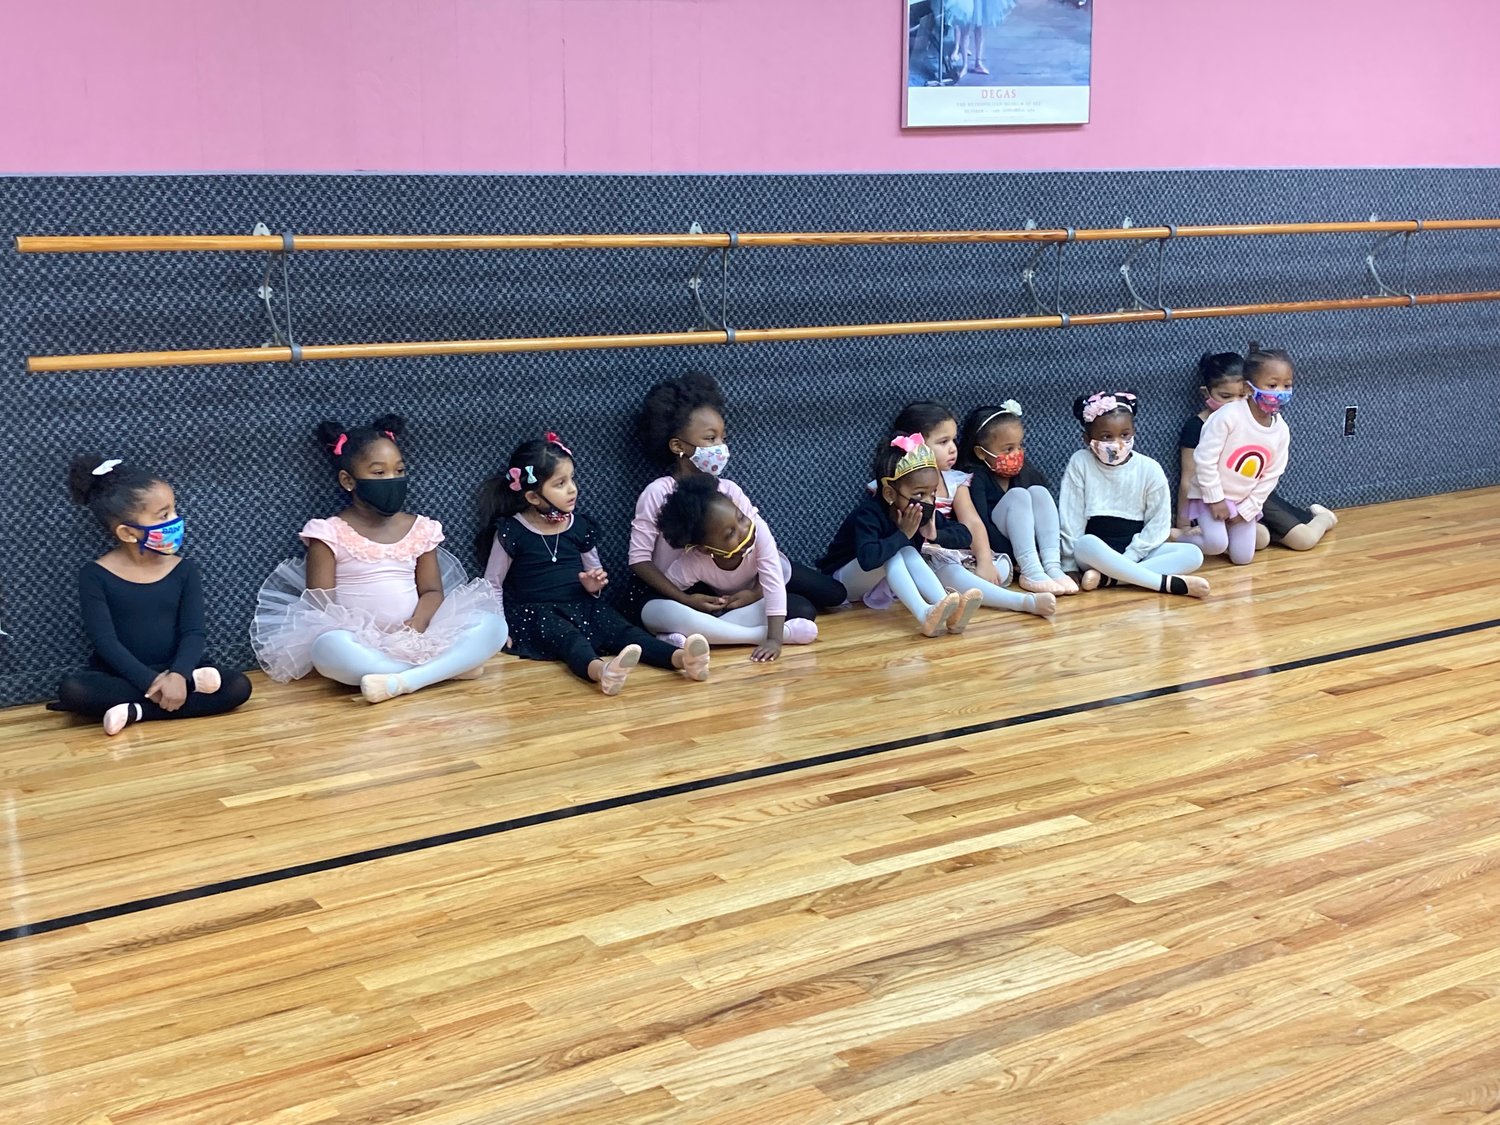 Two- to five-year-old girls line up waiting for their creative dance class to start.